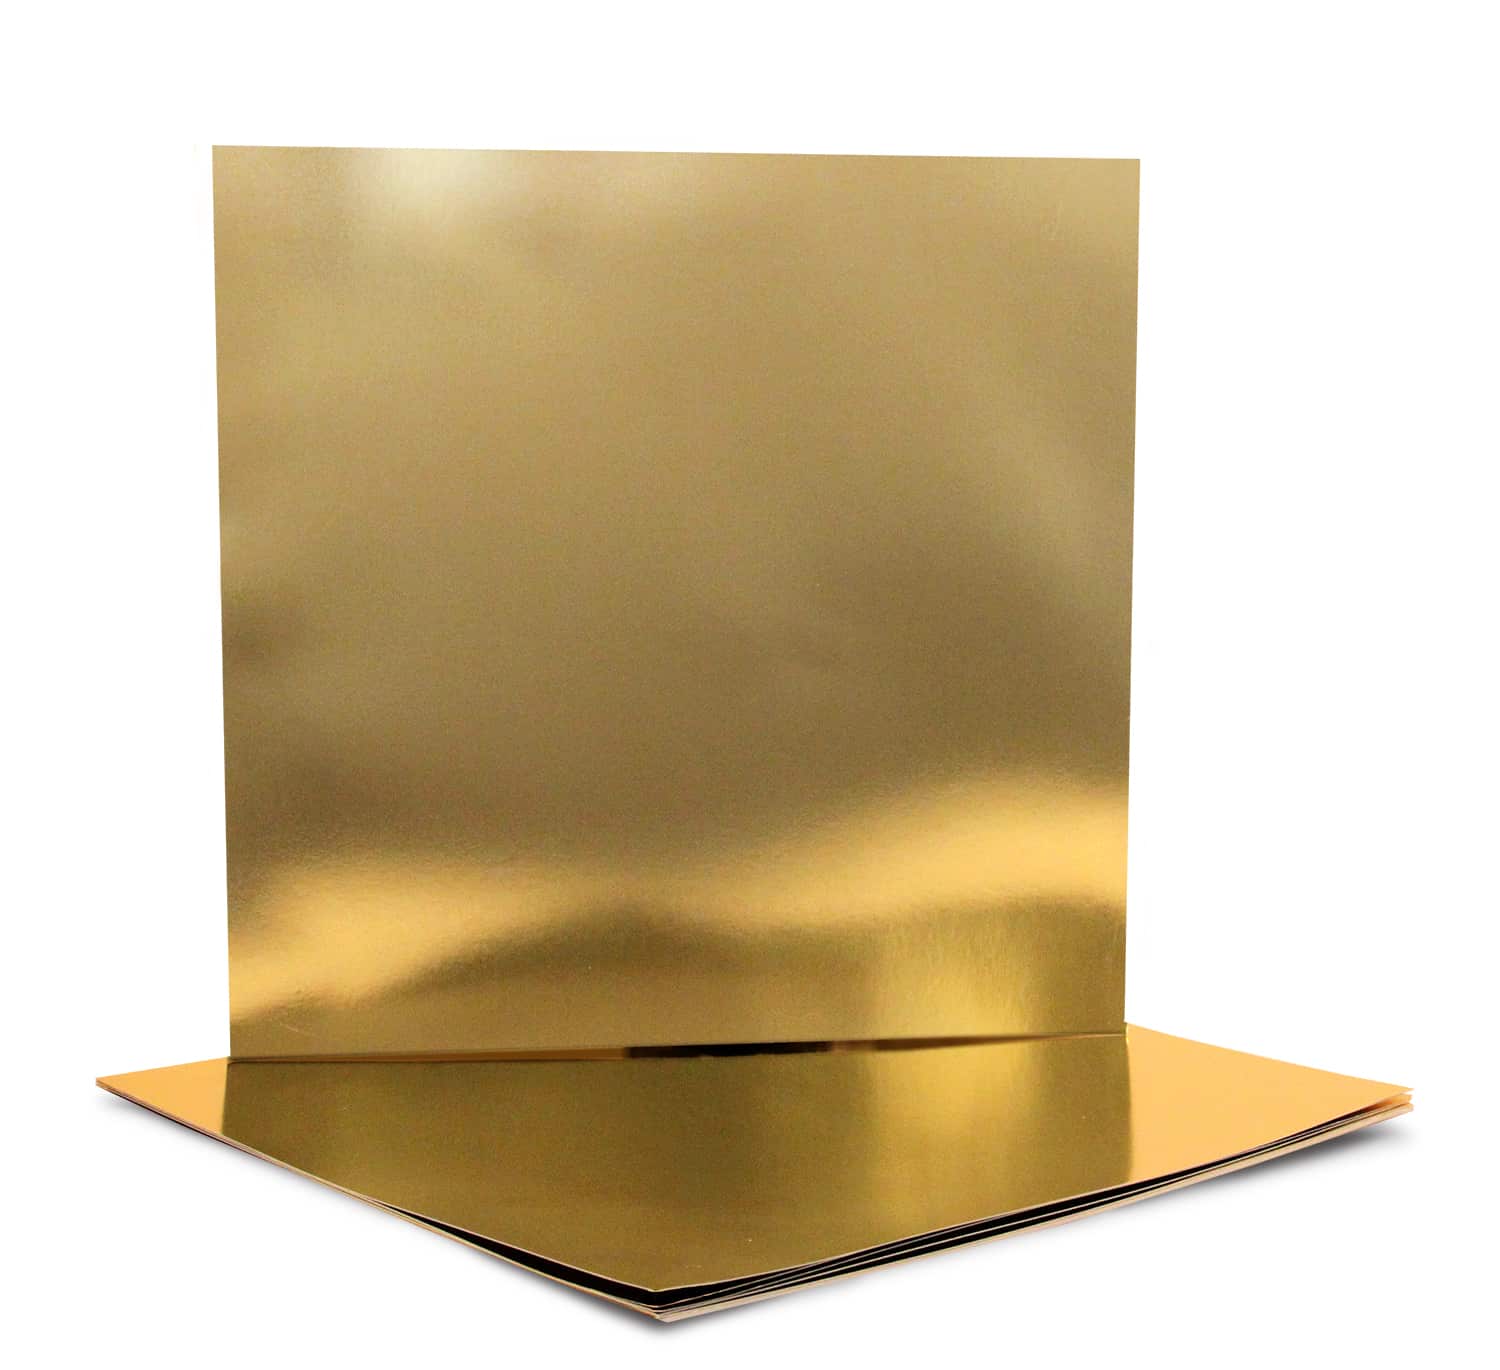 https://www.hyglossproducts.com/wp-content/uploads/2021/12/28124_gold_metallic_foil_board_2nd.jpg